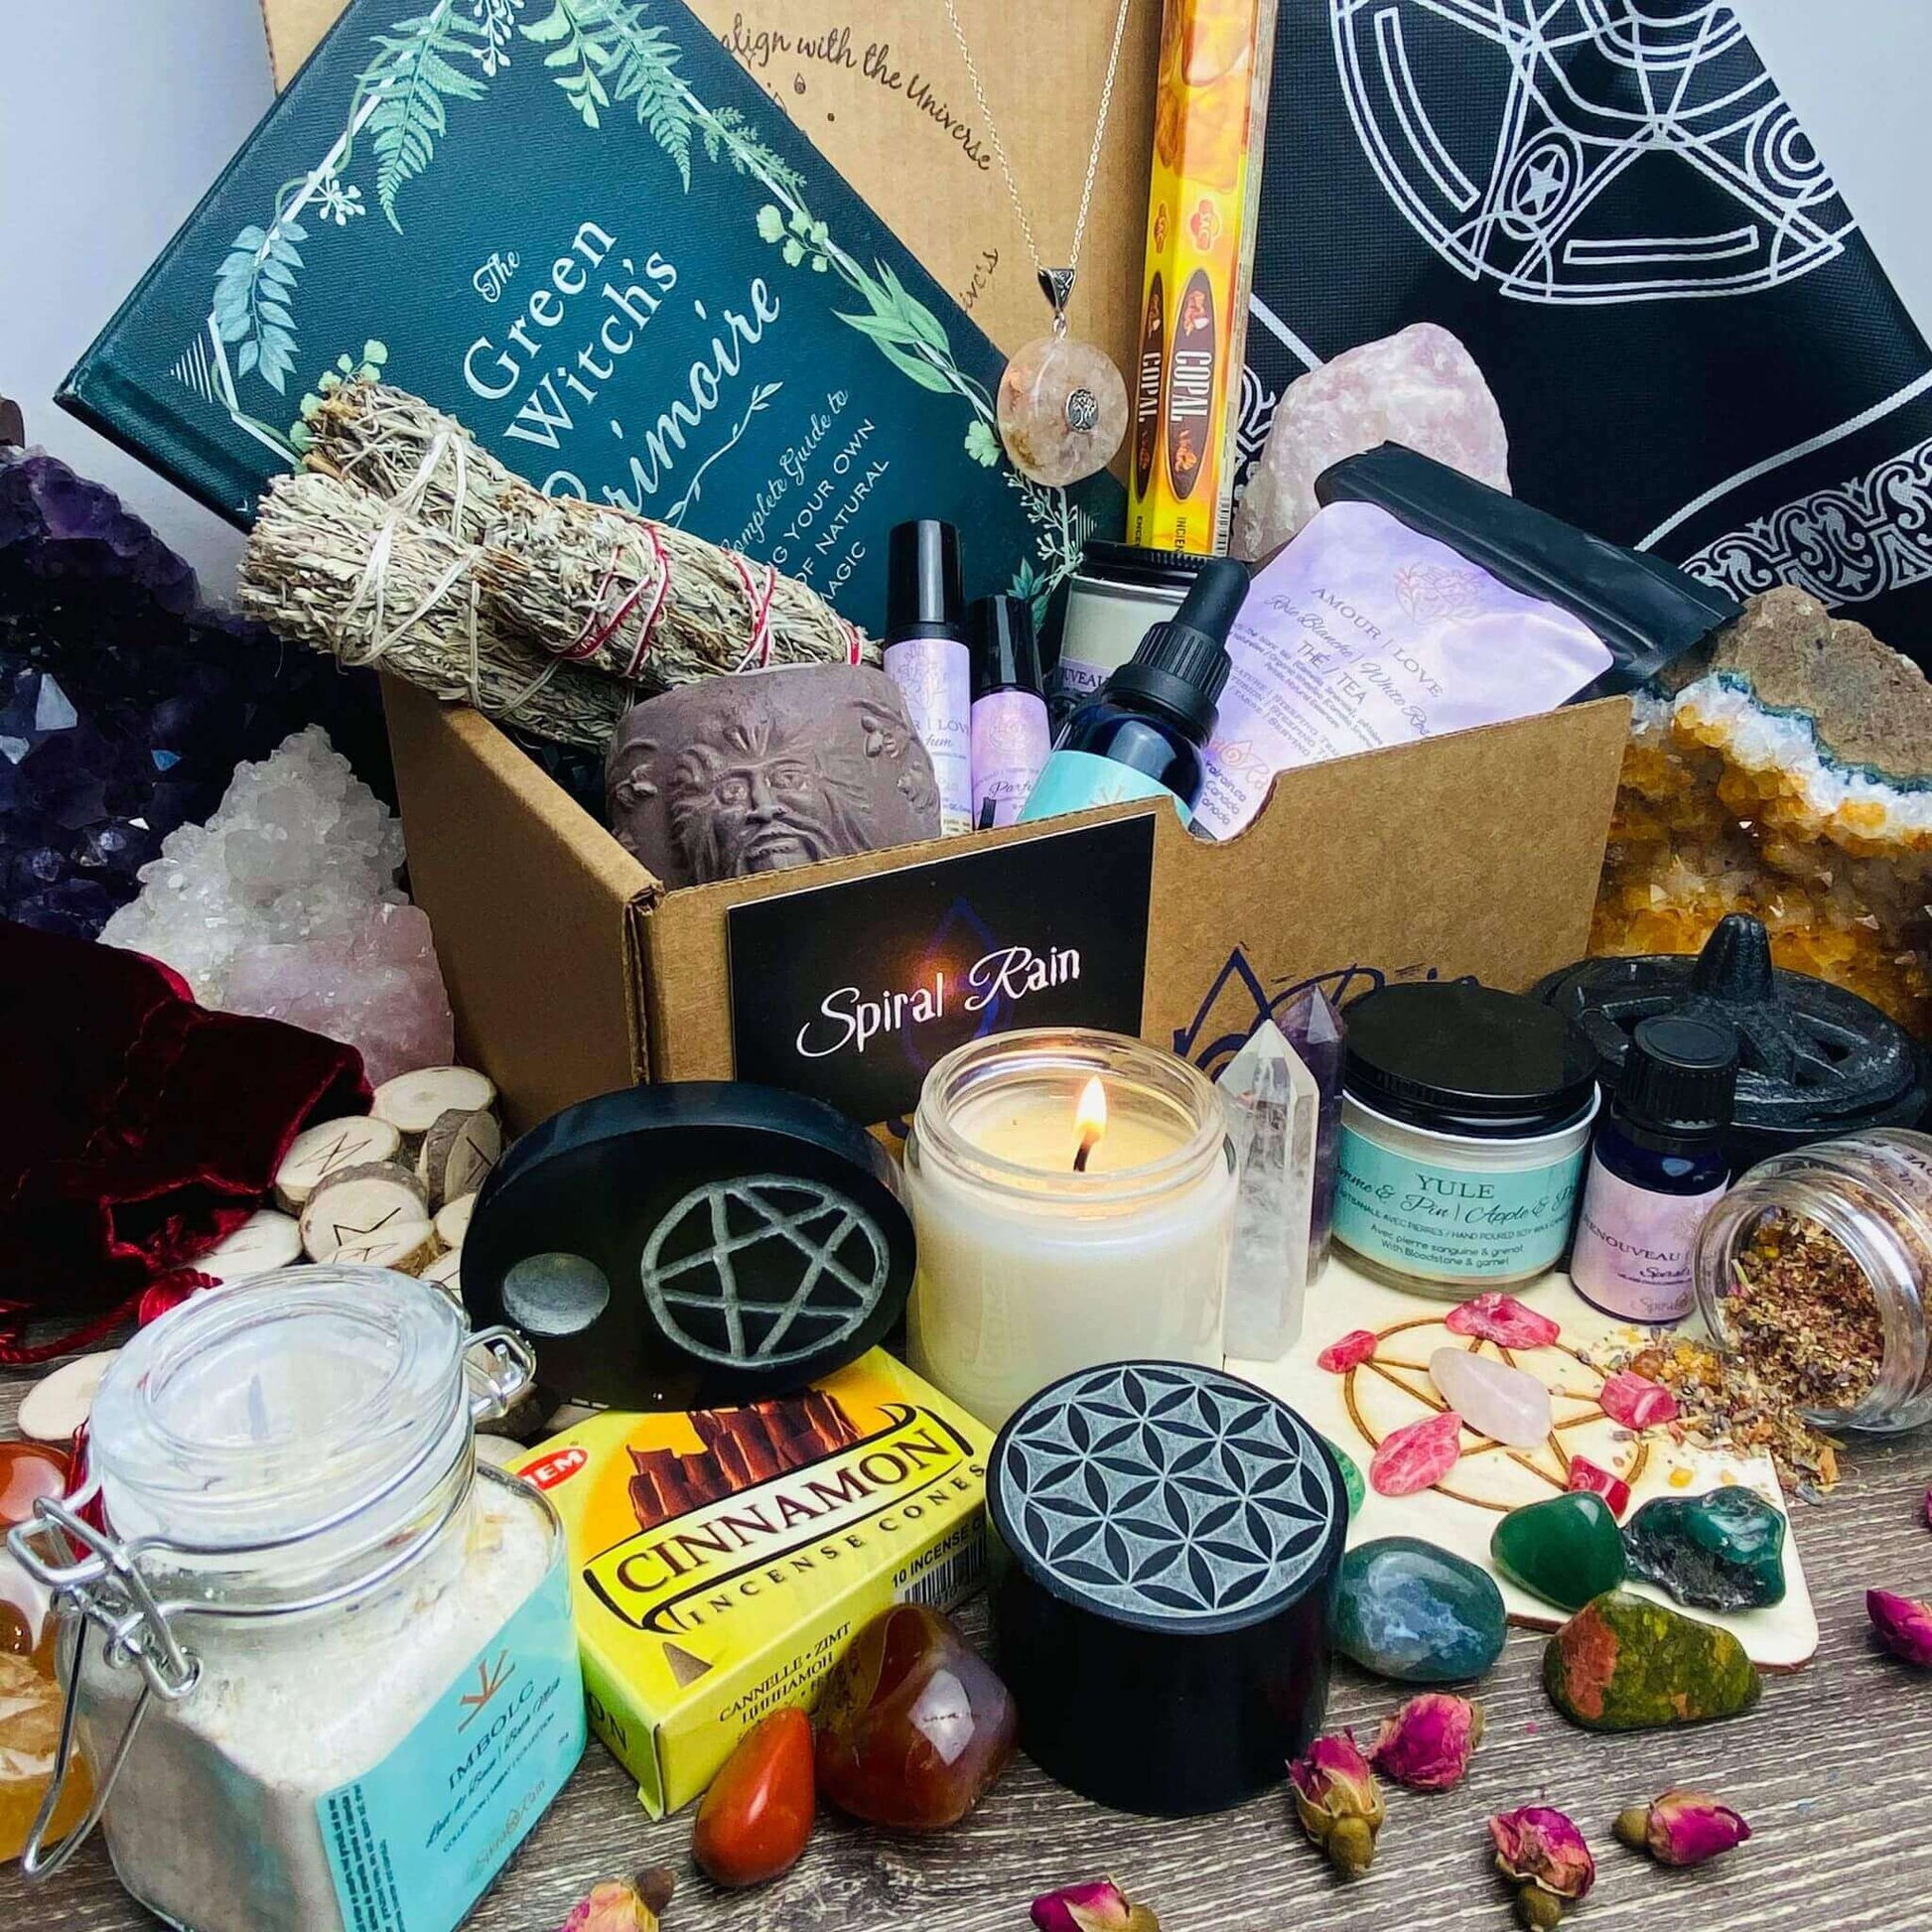 Apothecary + Ohm + Witch Box combo at $128.99 only from Spiral Rain